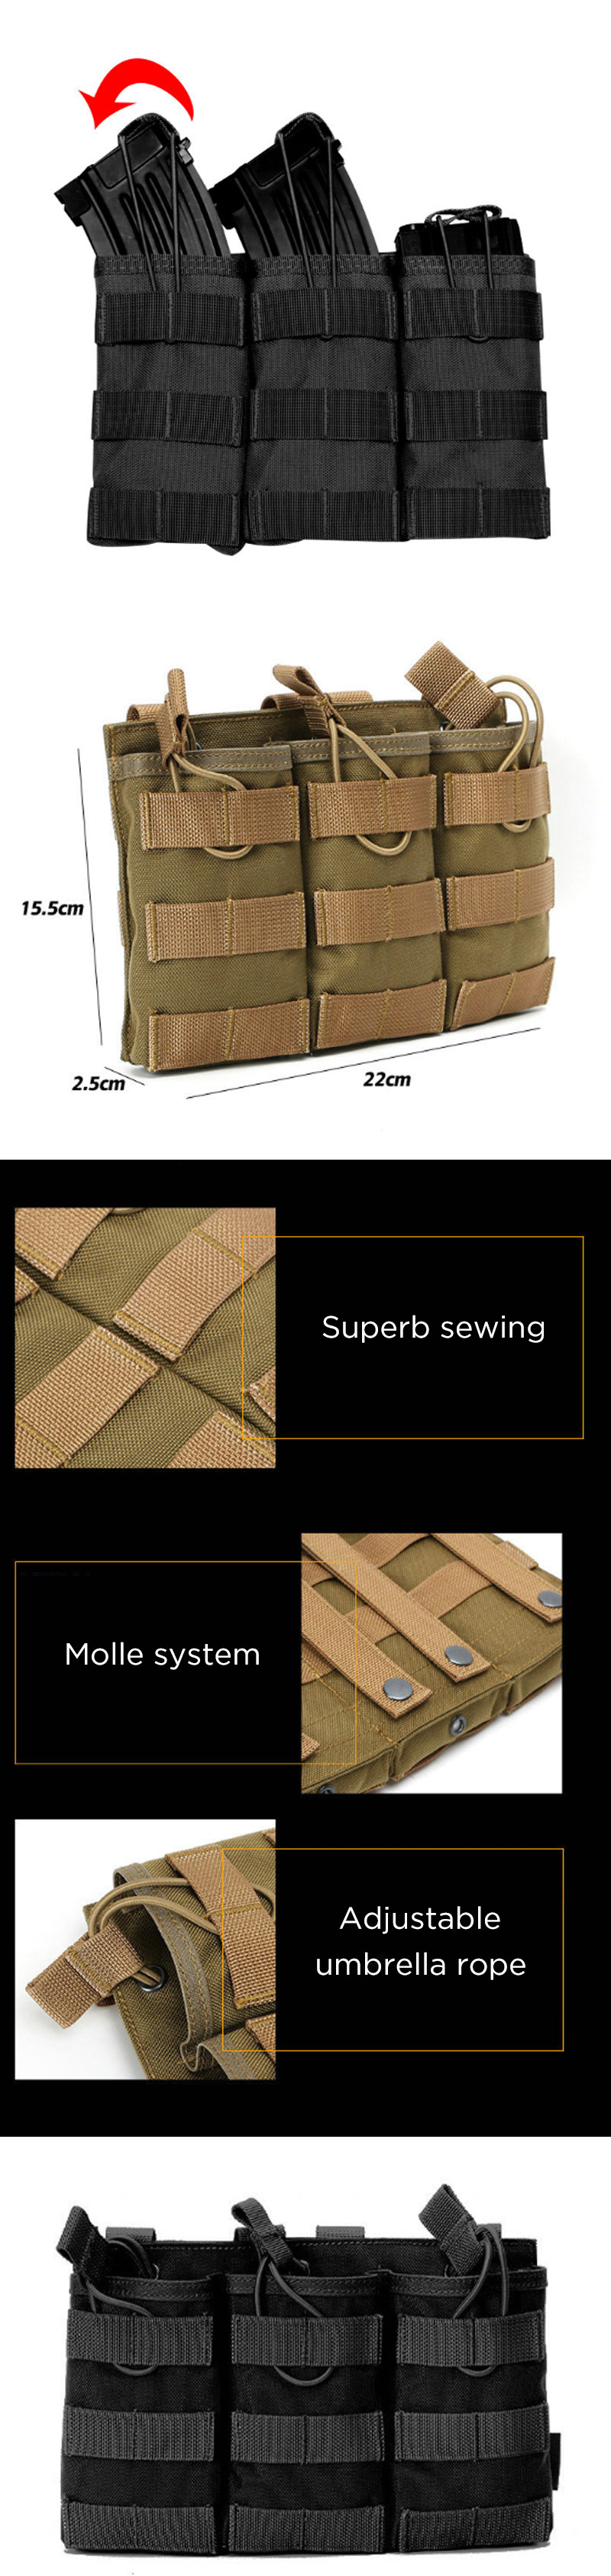 ZANLURE-1000D-Nylon-Molle-Tactical-Bag-Triple-Magazine-Pouch-For-Camping-Hunting-1556491-1